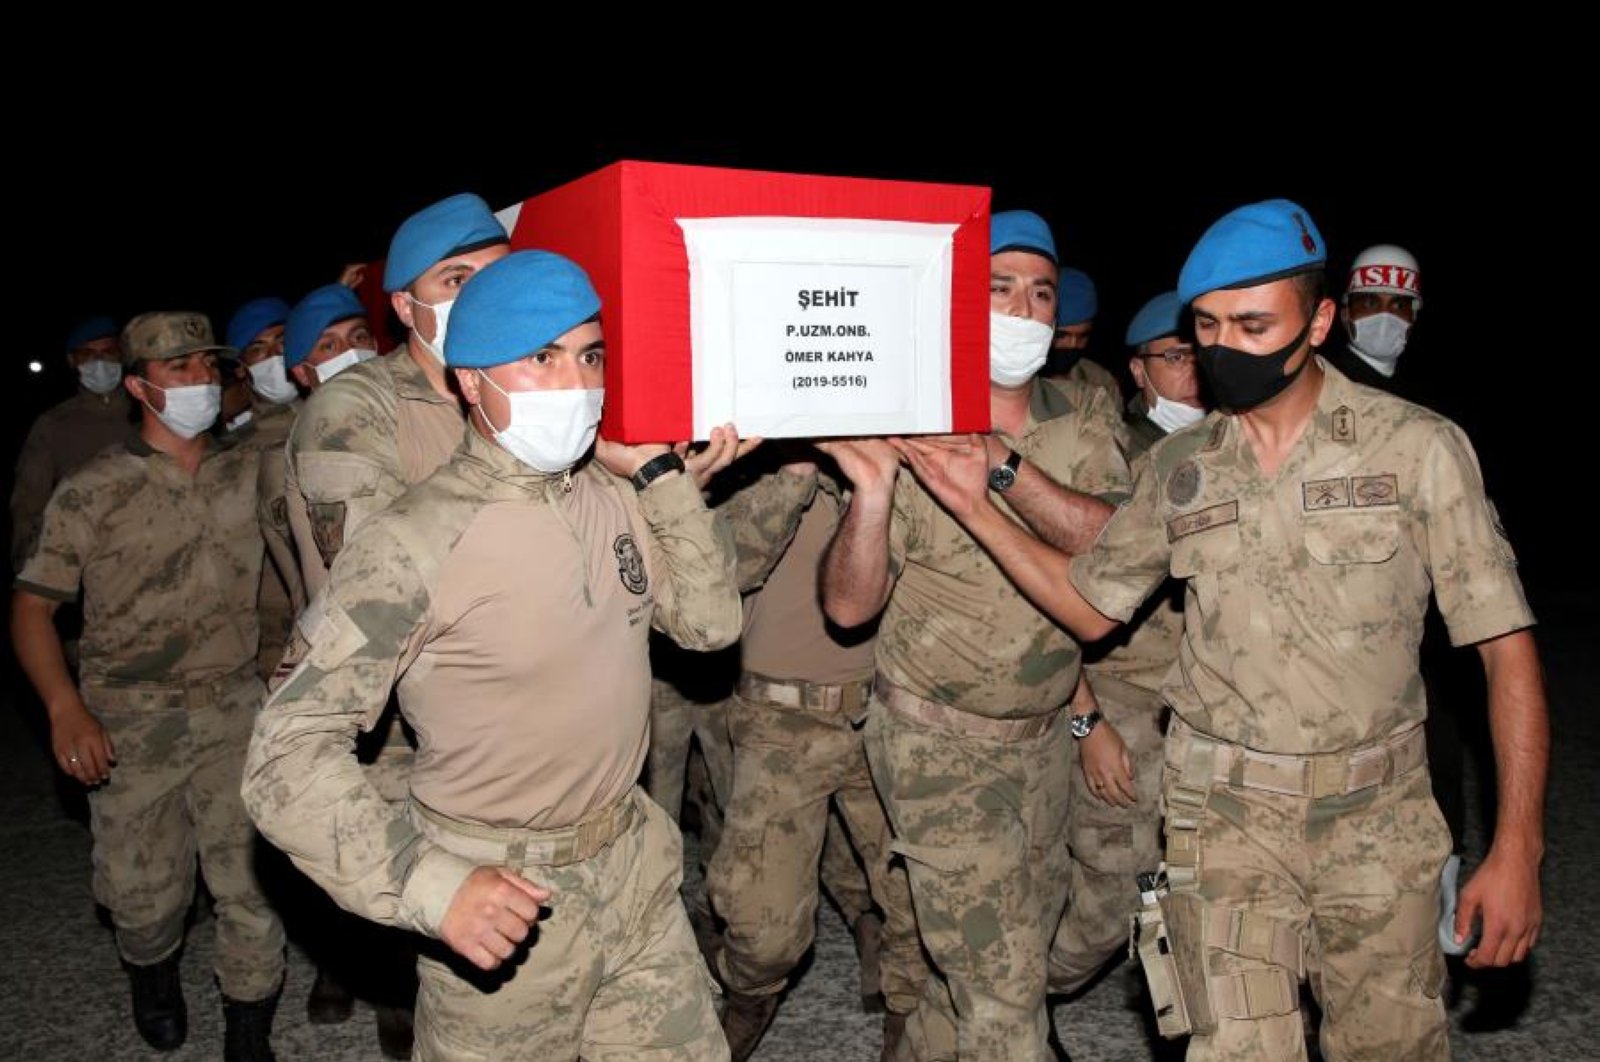 Soldiers carry the coffin of Ömer Kahya, a corporal killed in counterterrorism operations in Iraq, during a funeral ceremony in Şırnak, Turkey, June 19, 2020. (COURTESY OF MINISTRY OF NATIONAL DEFENSE) 